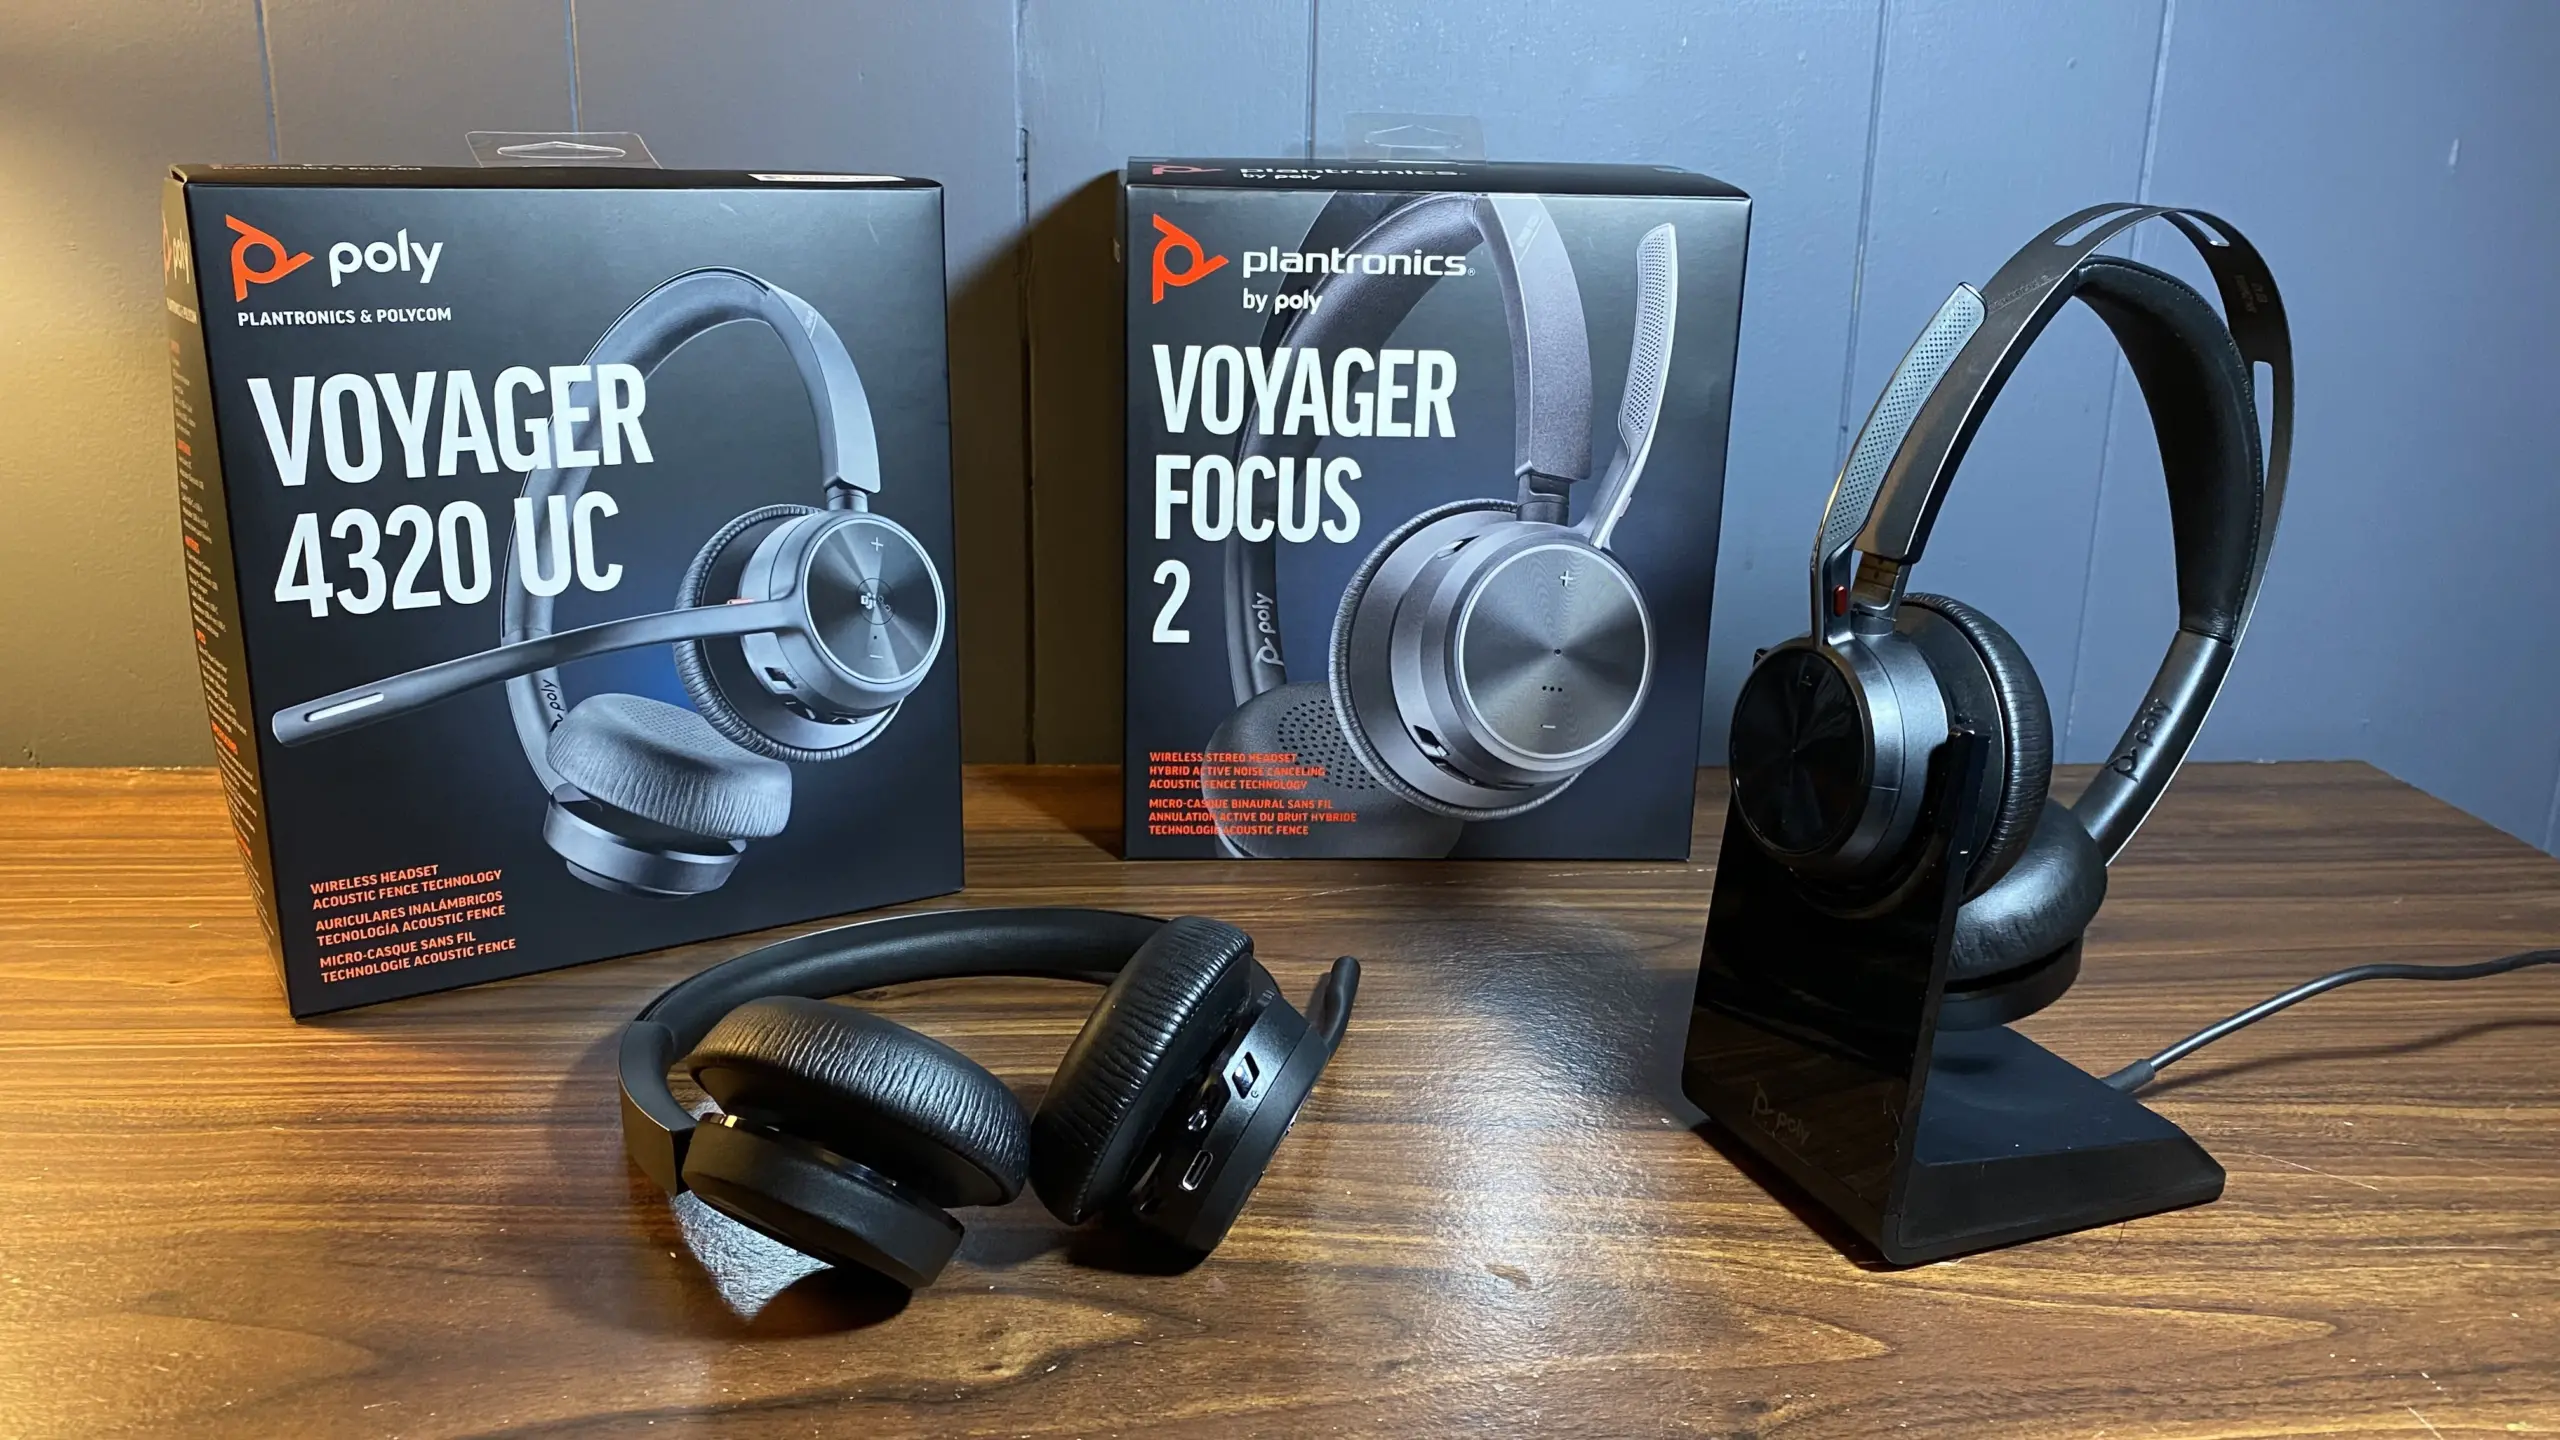 Voyager Focus 2 and Voyager 4320 UC headsets